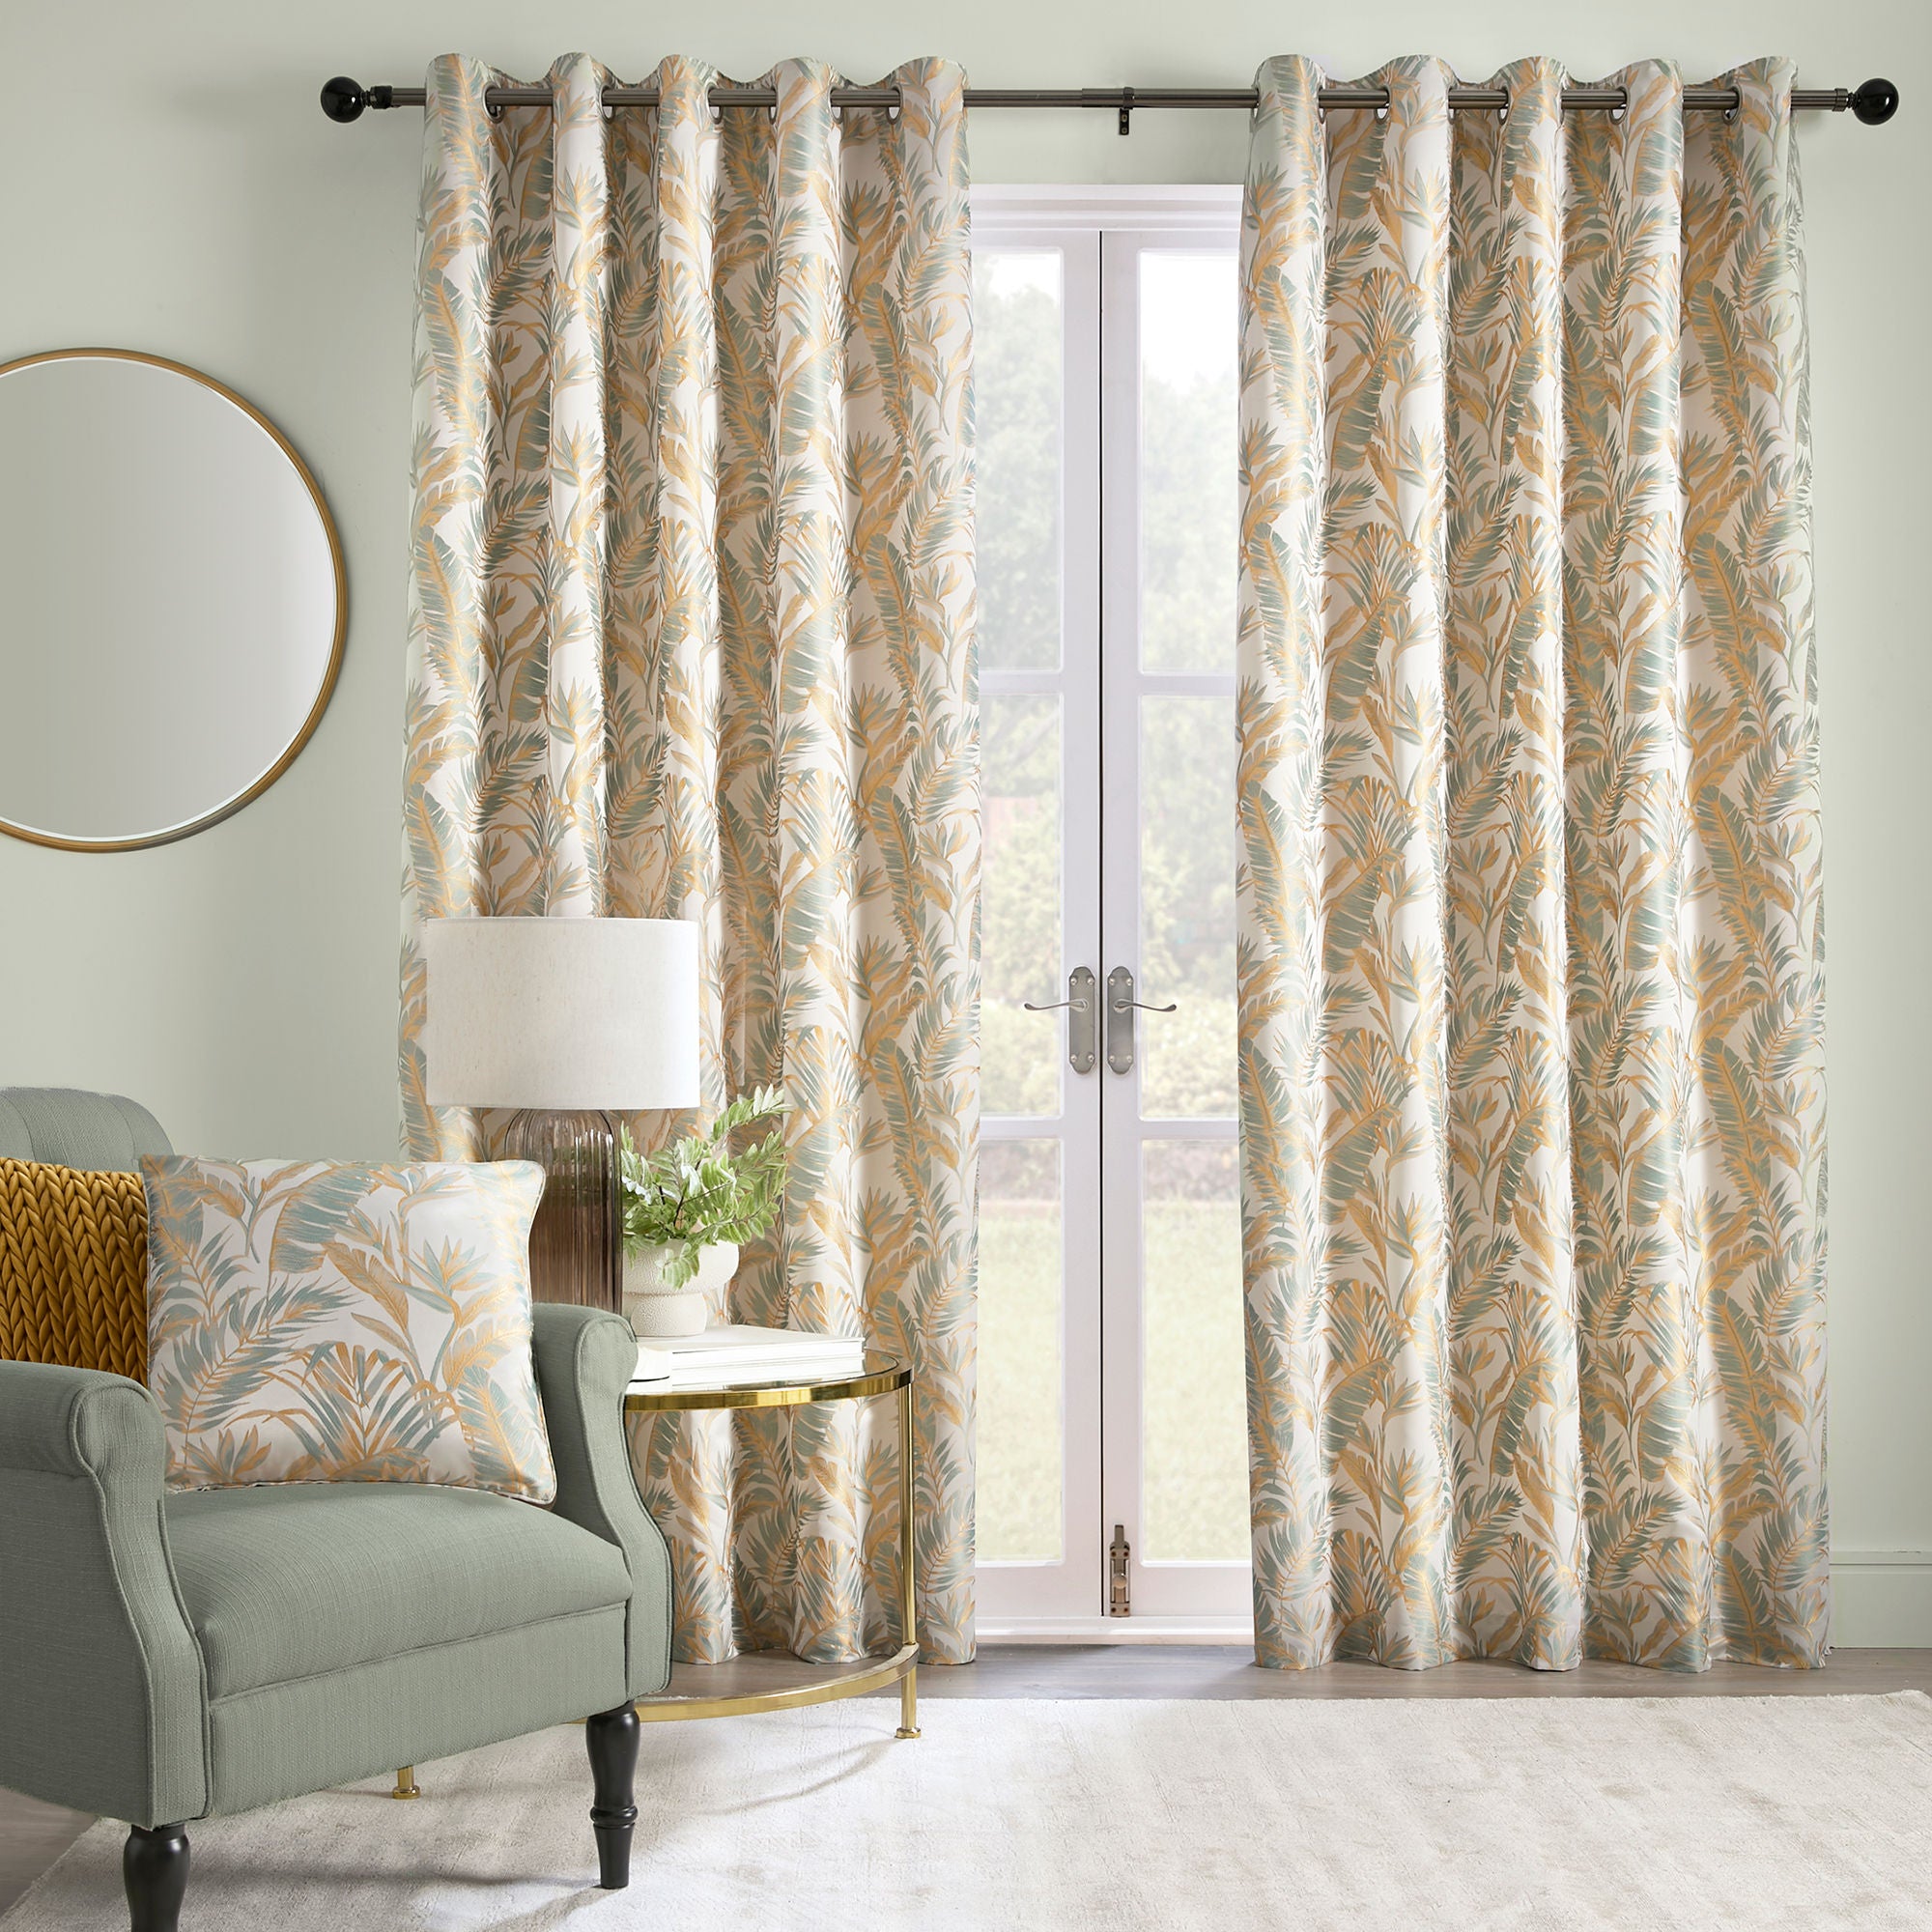 Paradise Palm Pair of Eyelet Curtains by Laurence Llewelyn-Bowen in Duck Egg - Pair of Eyelet Curtains - Laurence Llewelyn-Bowen